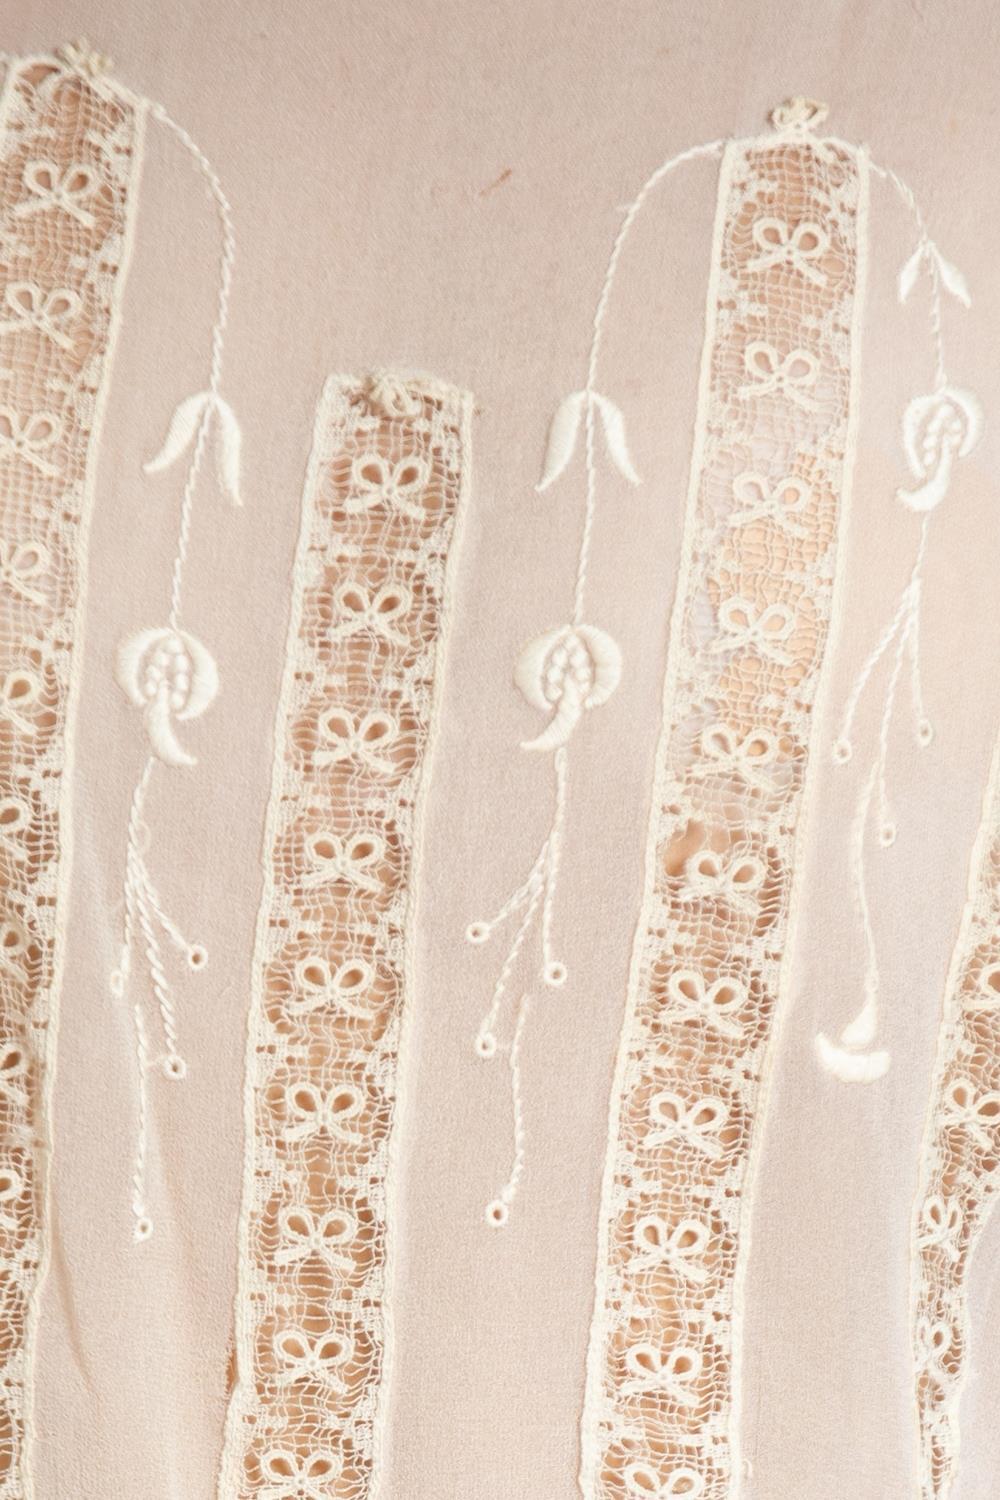 1920S Blush Sheer Silk Chiffon Embroidered Lace Top For Sale 3